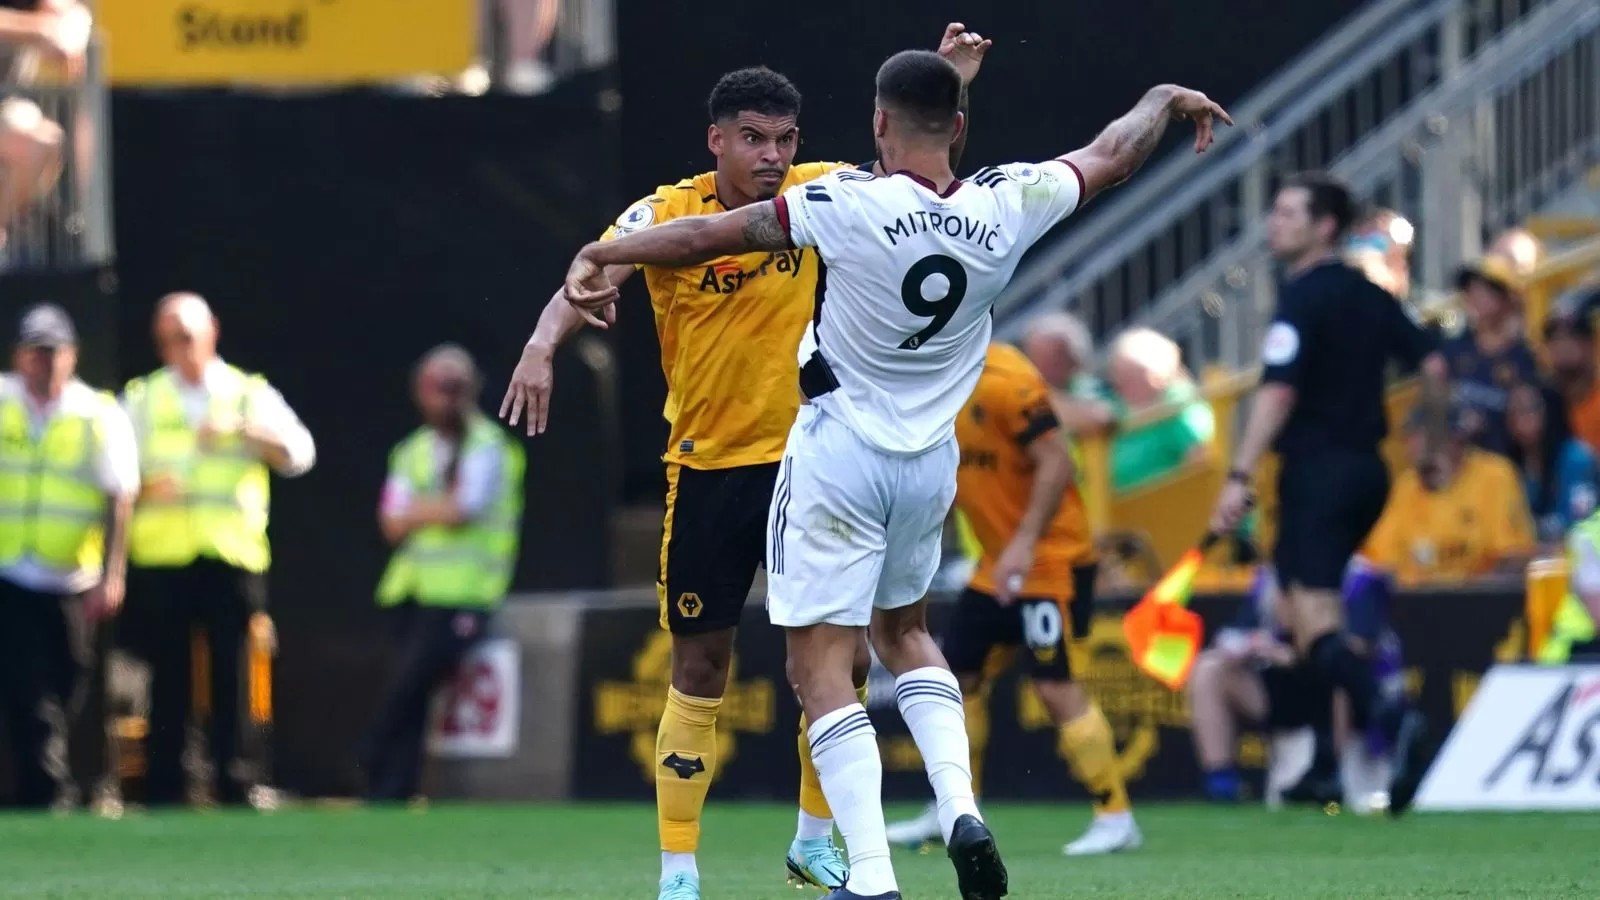 Nottingham Forest agree to pay incredible £44.5m fee for Wolves star Gibbs-White